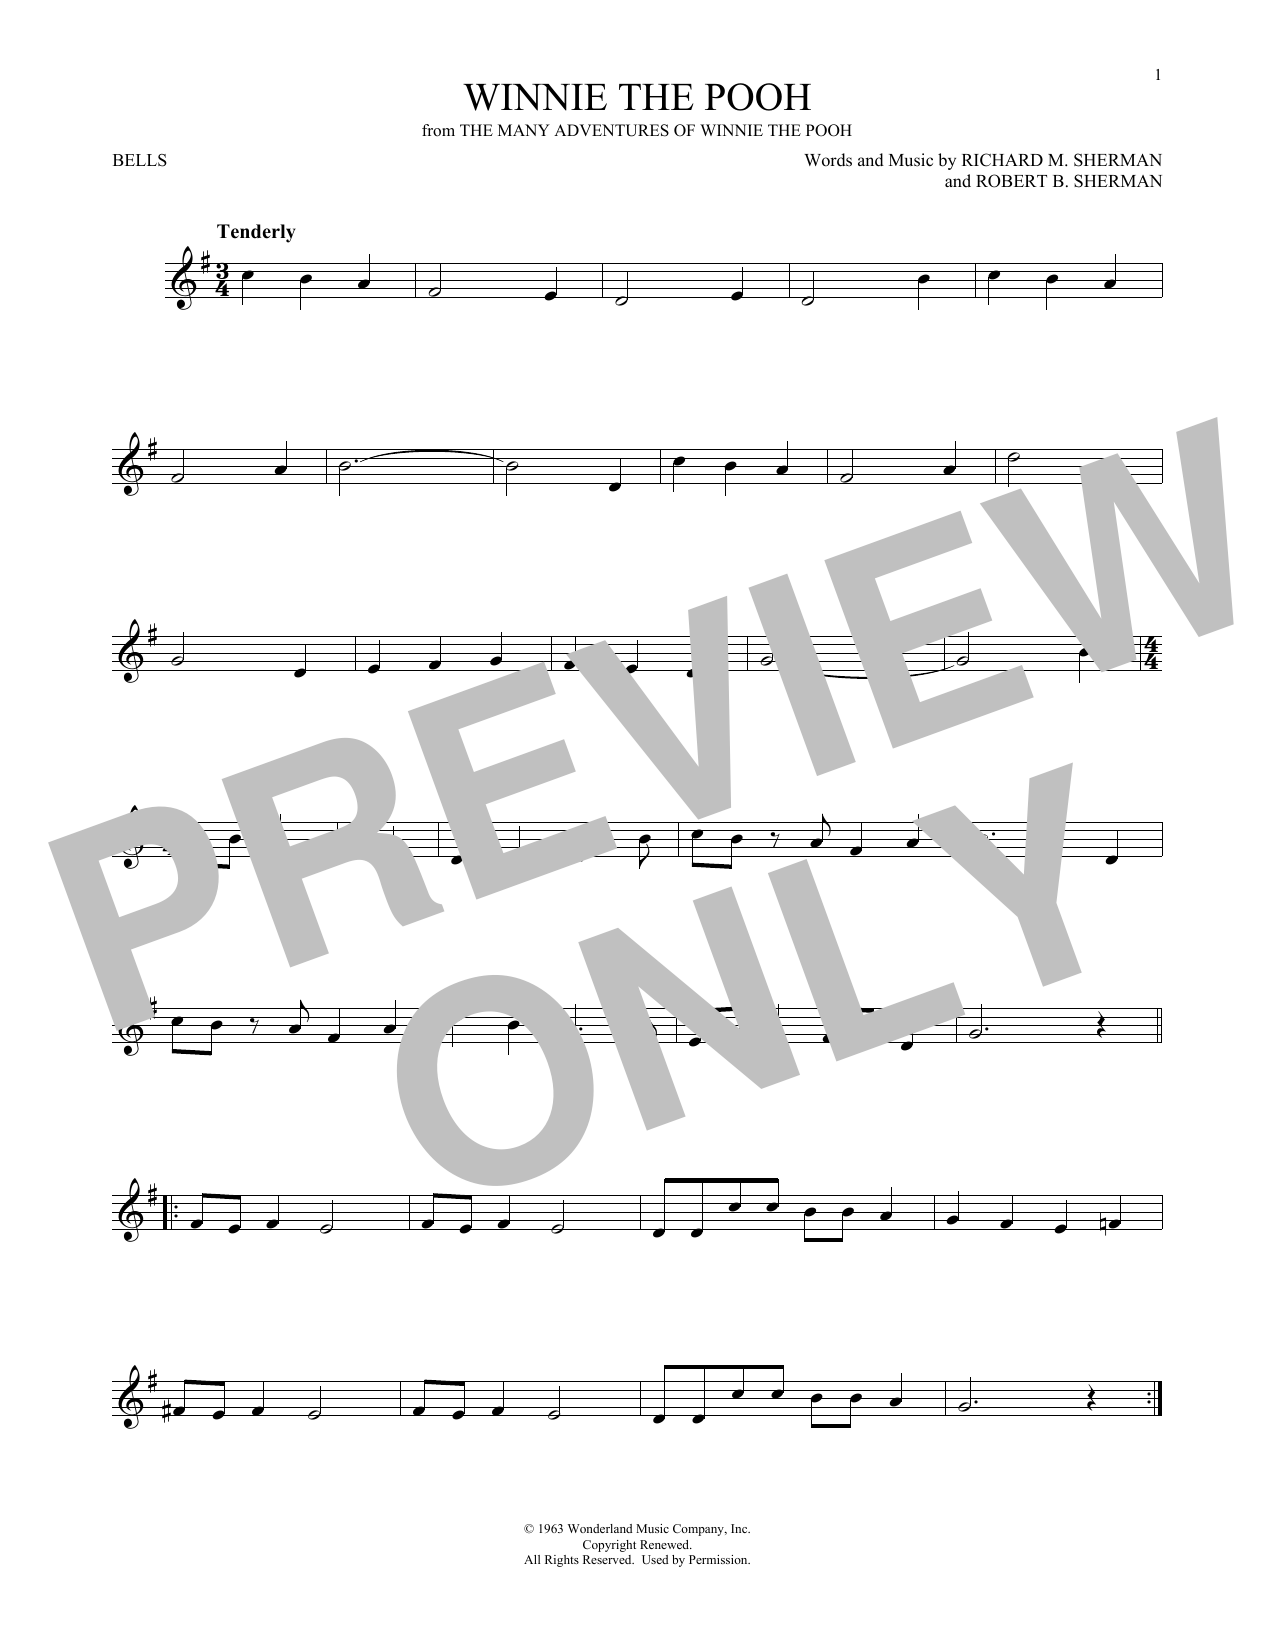 Download Sherman Brothers Winnie The Pooh Sheet Music